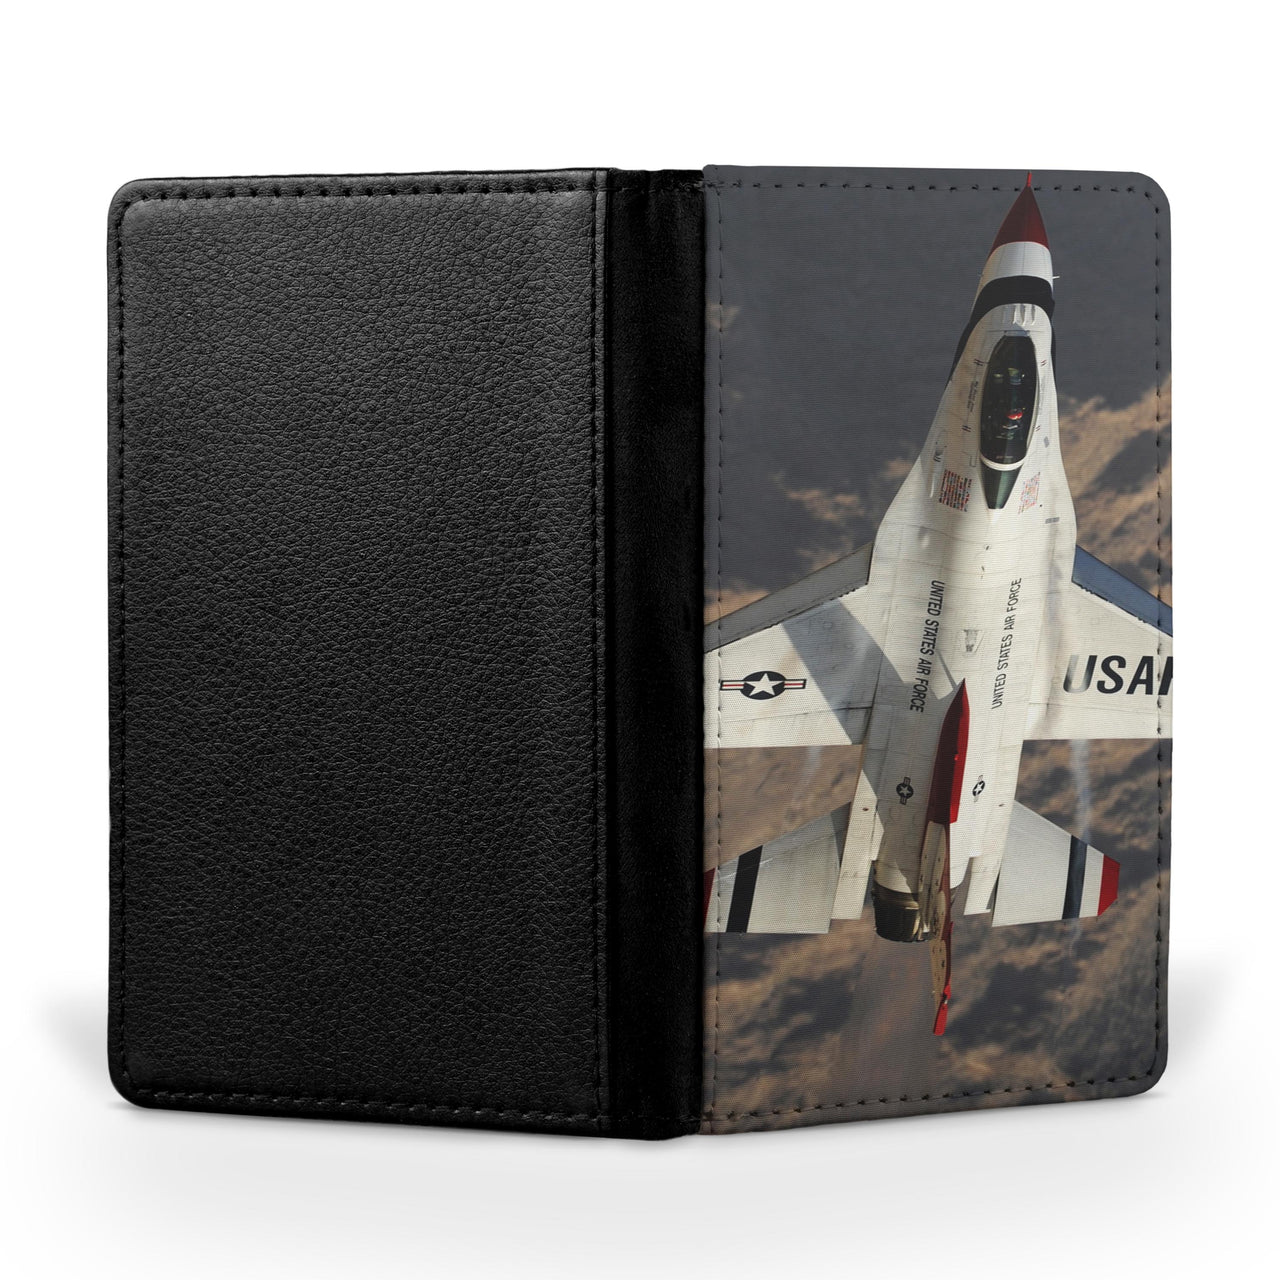 Amazing Show by Fighting Falcon F16 Printed Passport & Travel Cases